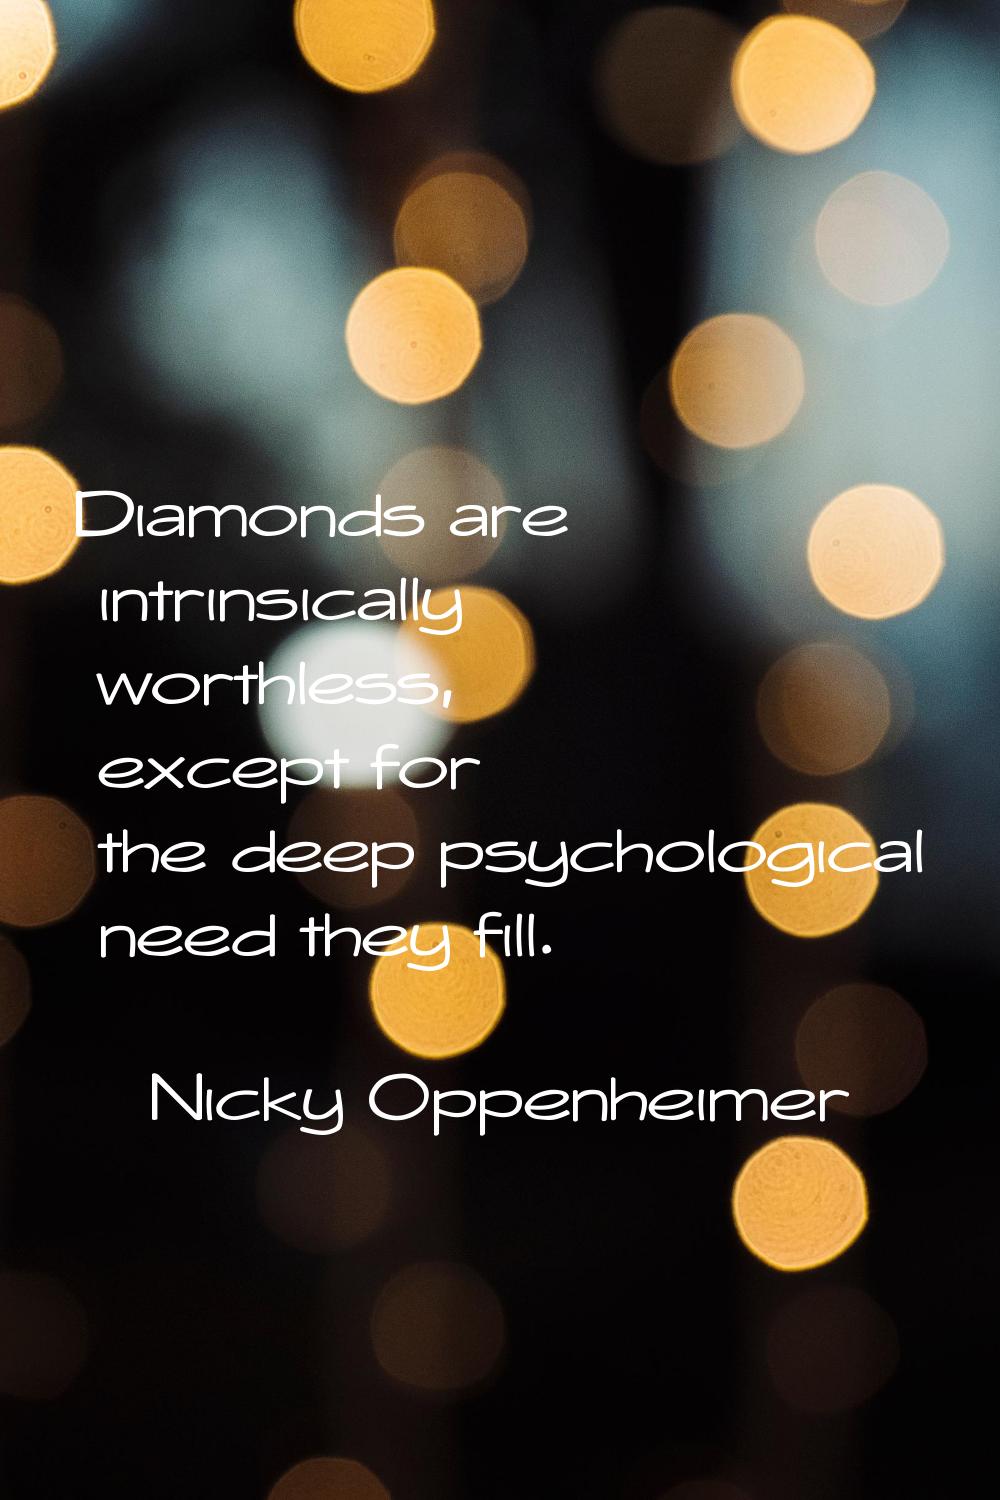 Diamonds are intrinsically worthless, except for the deep psychological need they fill.